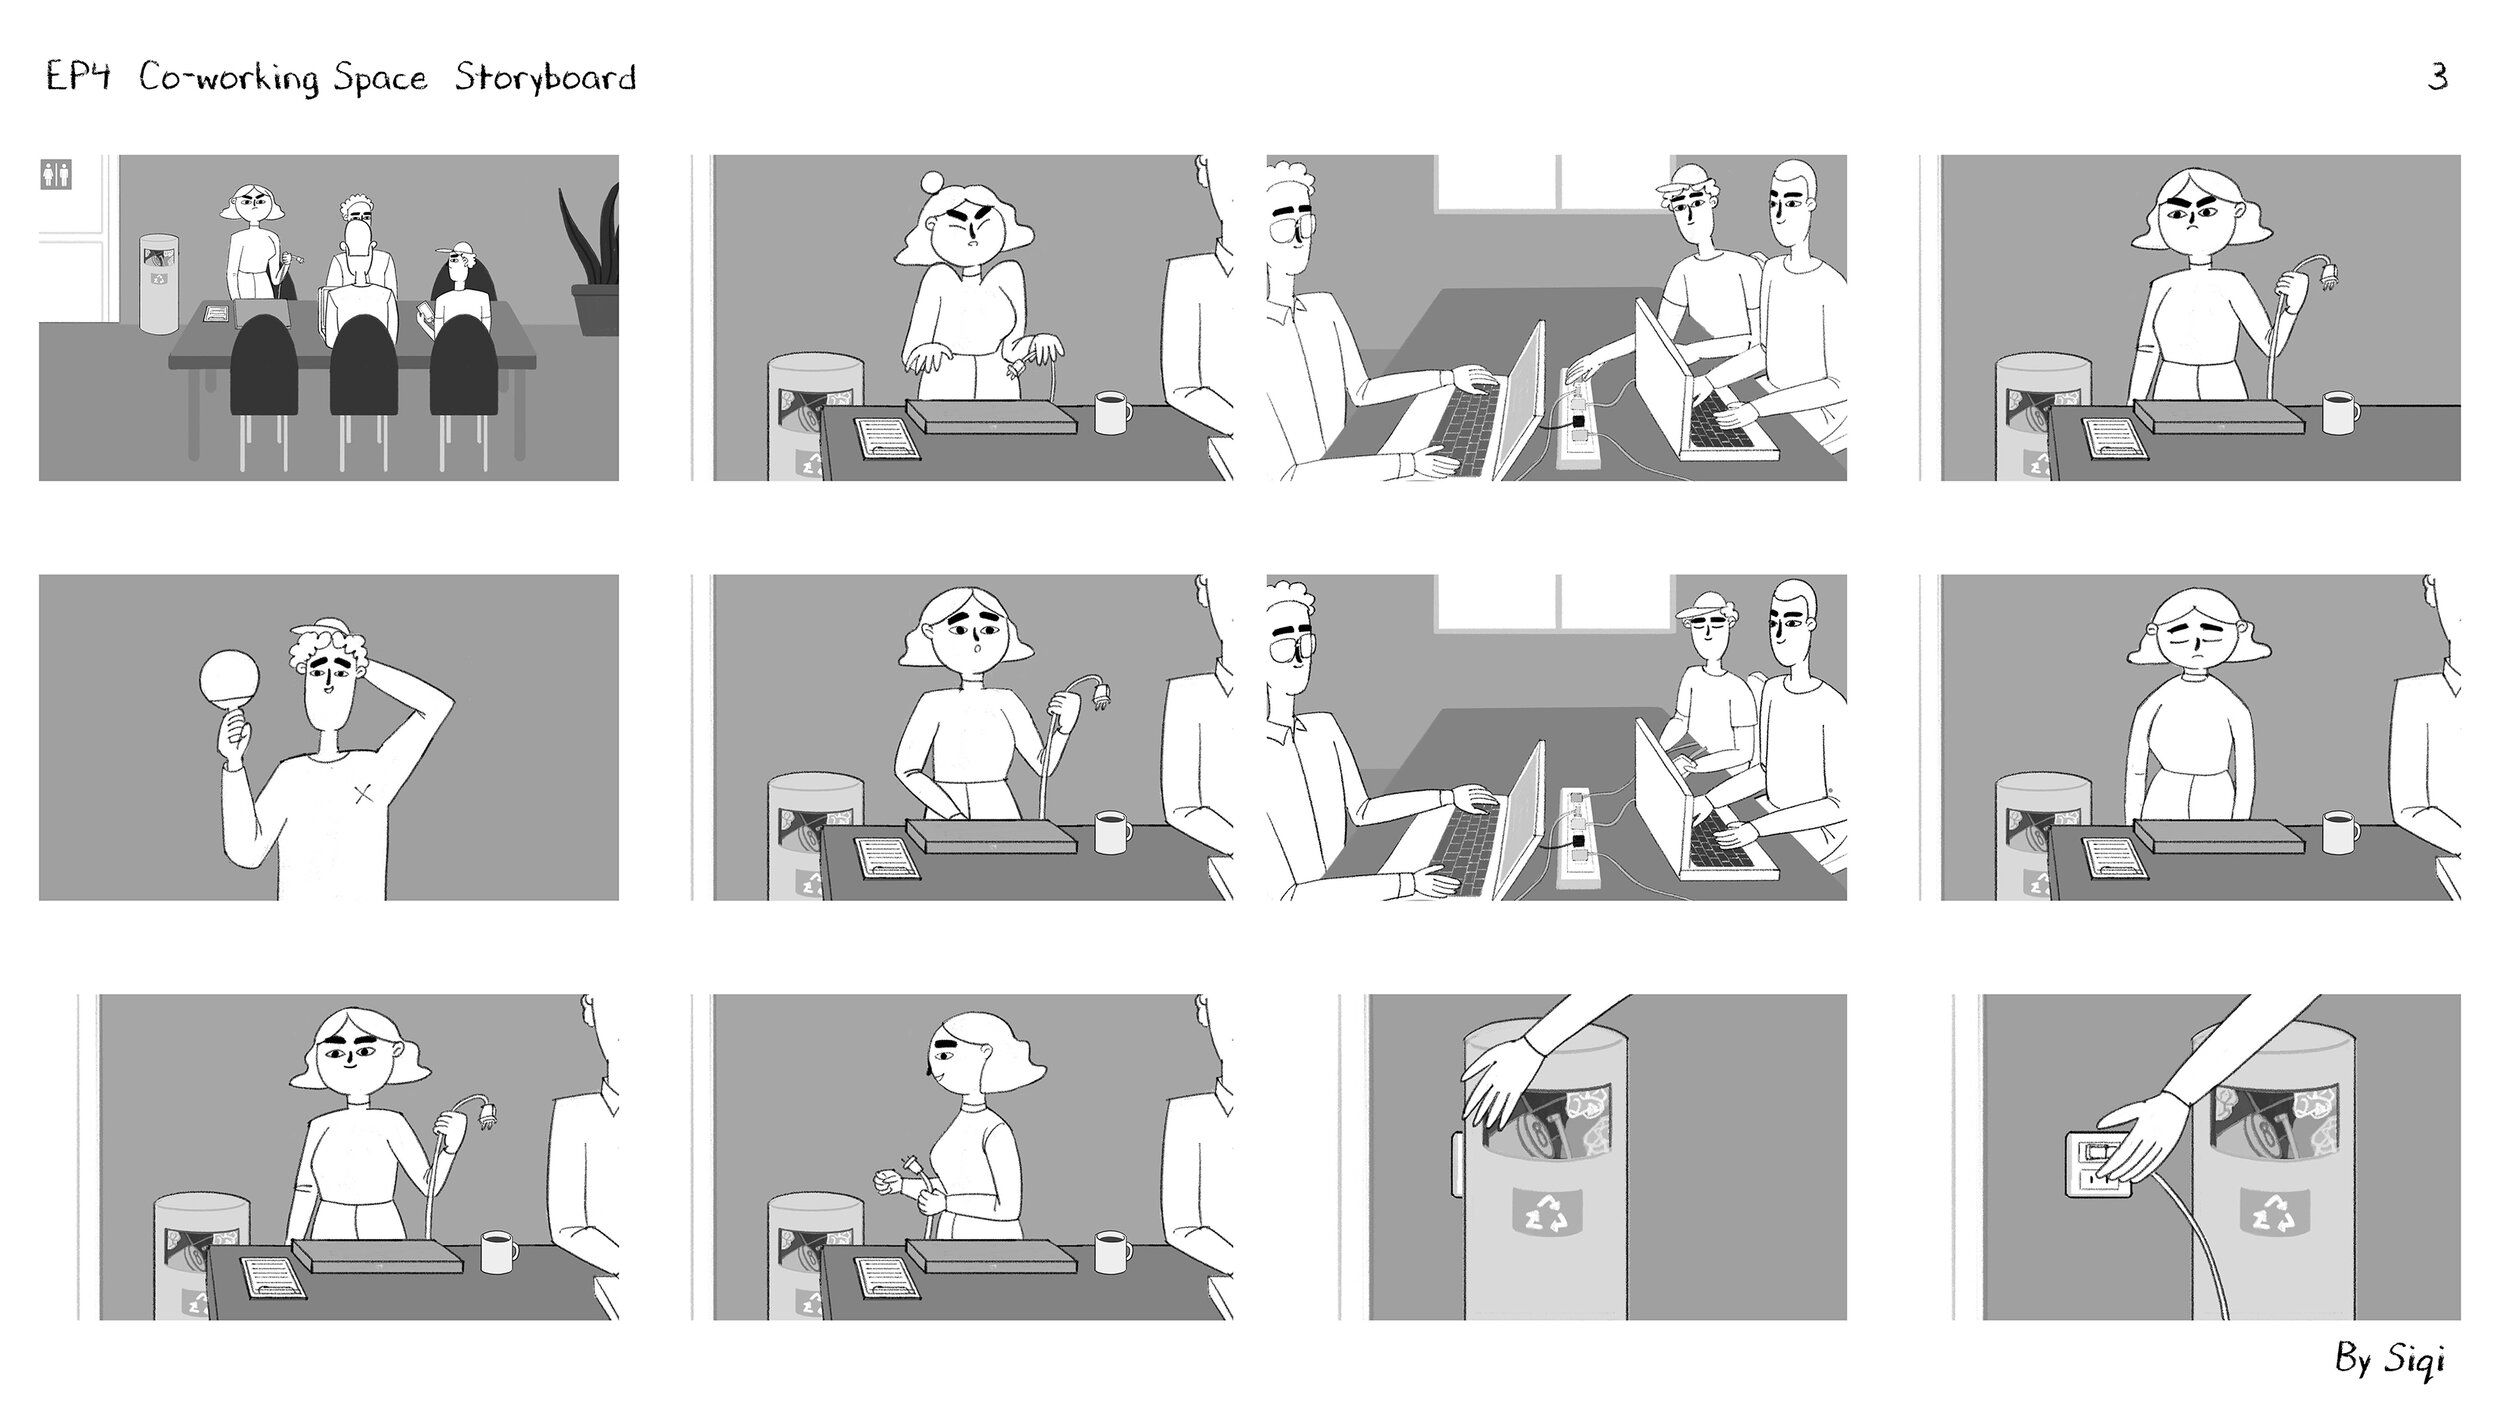 EP4_Co-working Space_Storyboard_Page_3.jpg